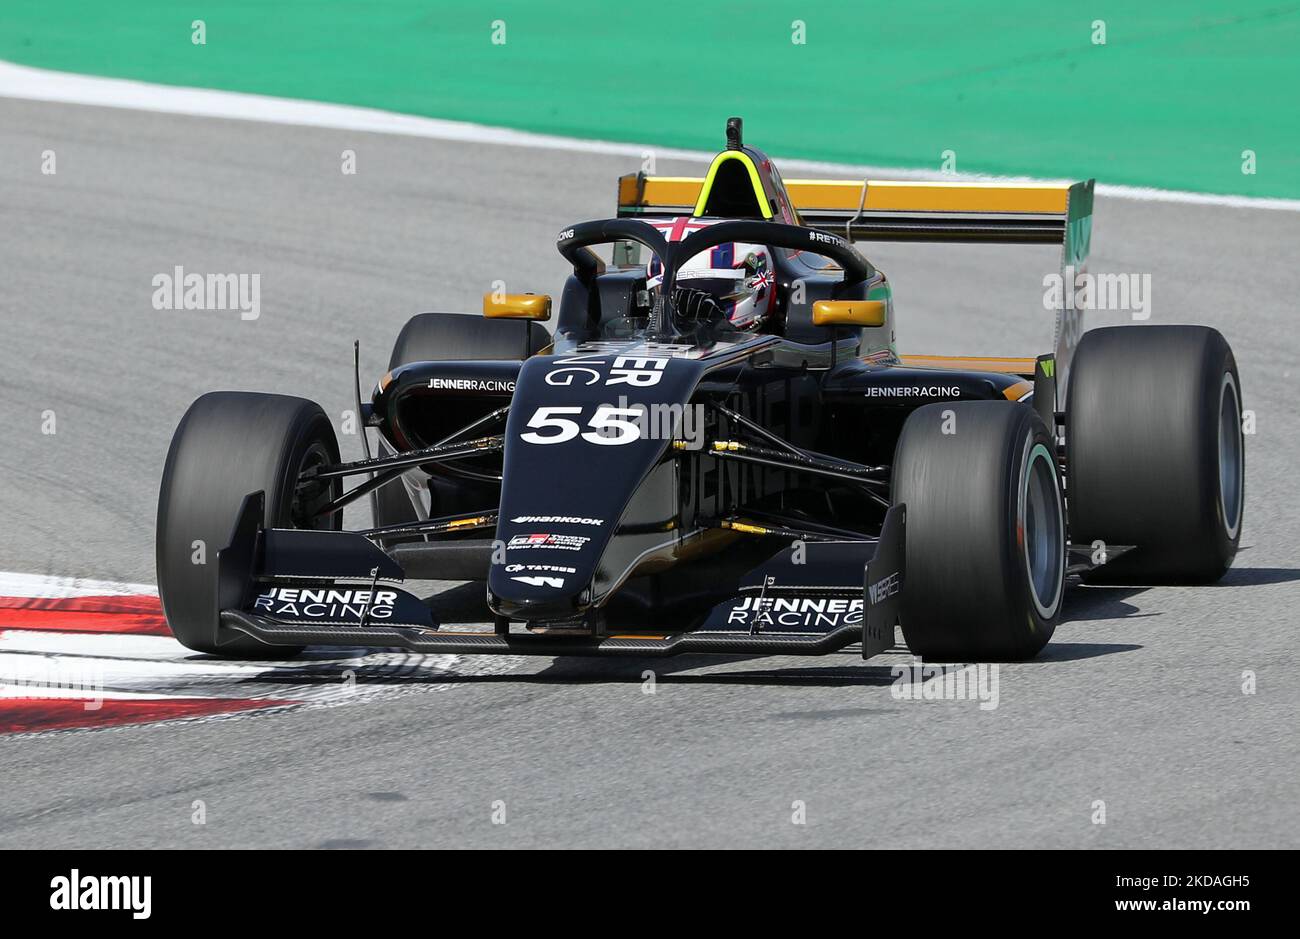 Jamie Chadwick, from Jenner Racing, during the W Series free practice during the Formula 1 Pirelli GP of Spain, held at the Barcelona-Catalunya Circuit, in Barcelona, on 20th May 2022. -- (Photo by Urbanandsport/NurPhoto) Stock Photo